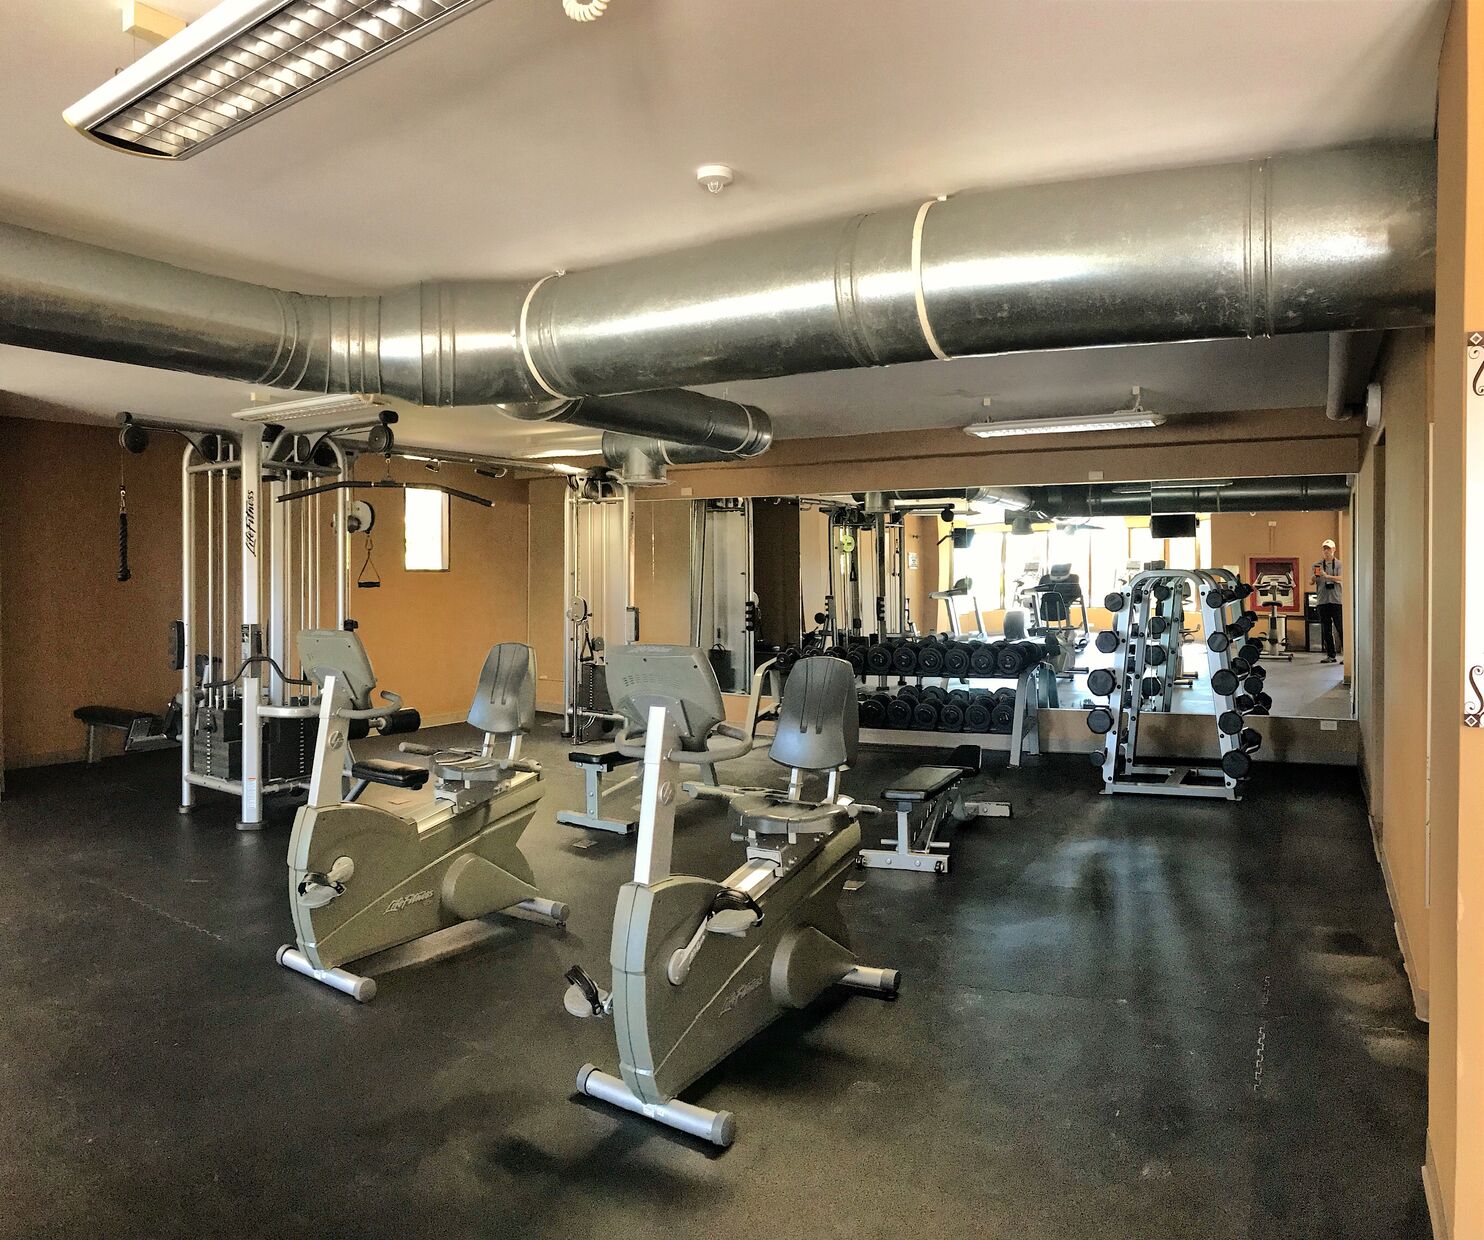 The complete gym includes cardio machines, free weights, as well as resistance machines.